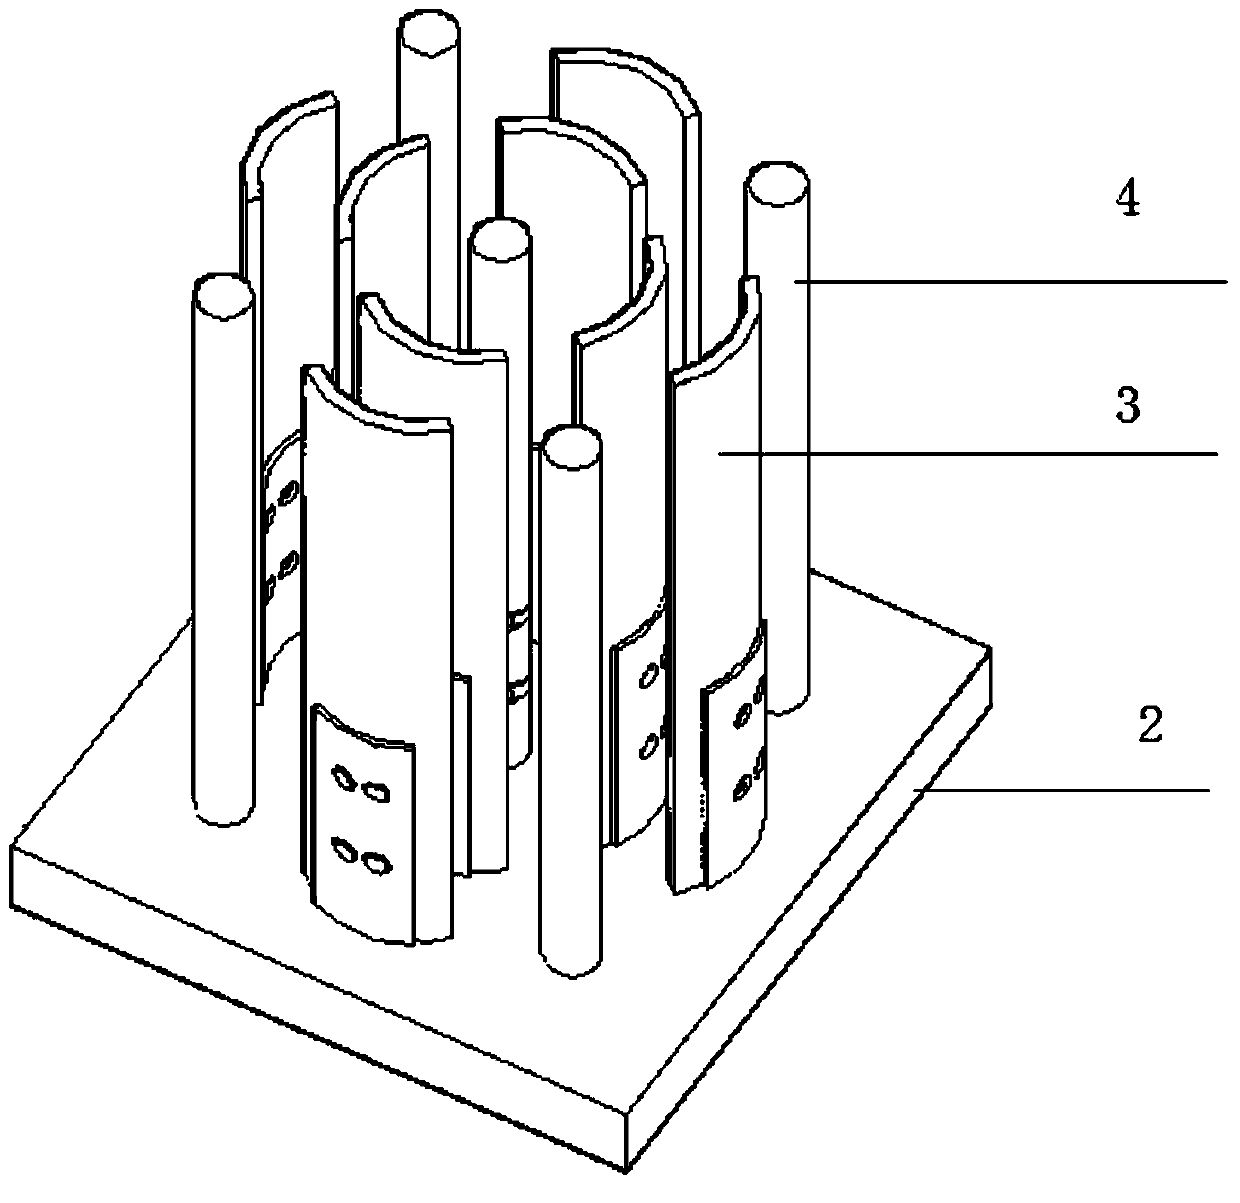 A C-shaped cylindrical shell self-resetting shock-absorbing shock-isolation damping device